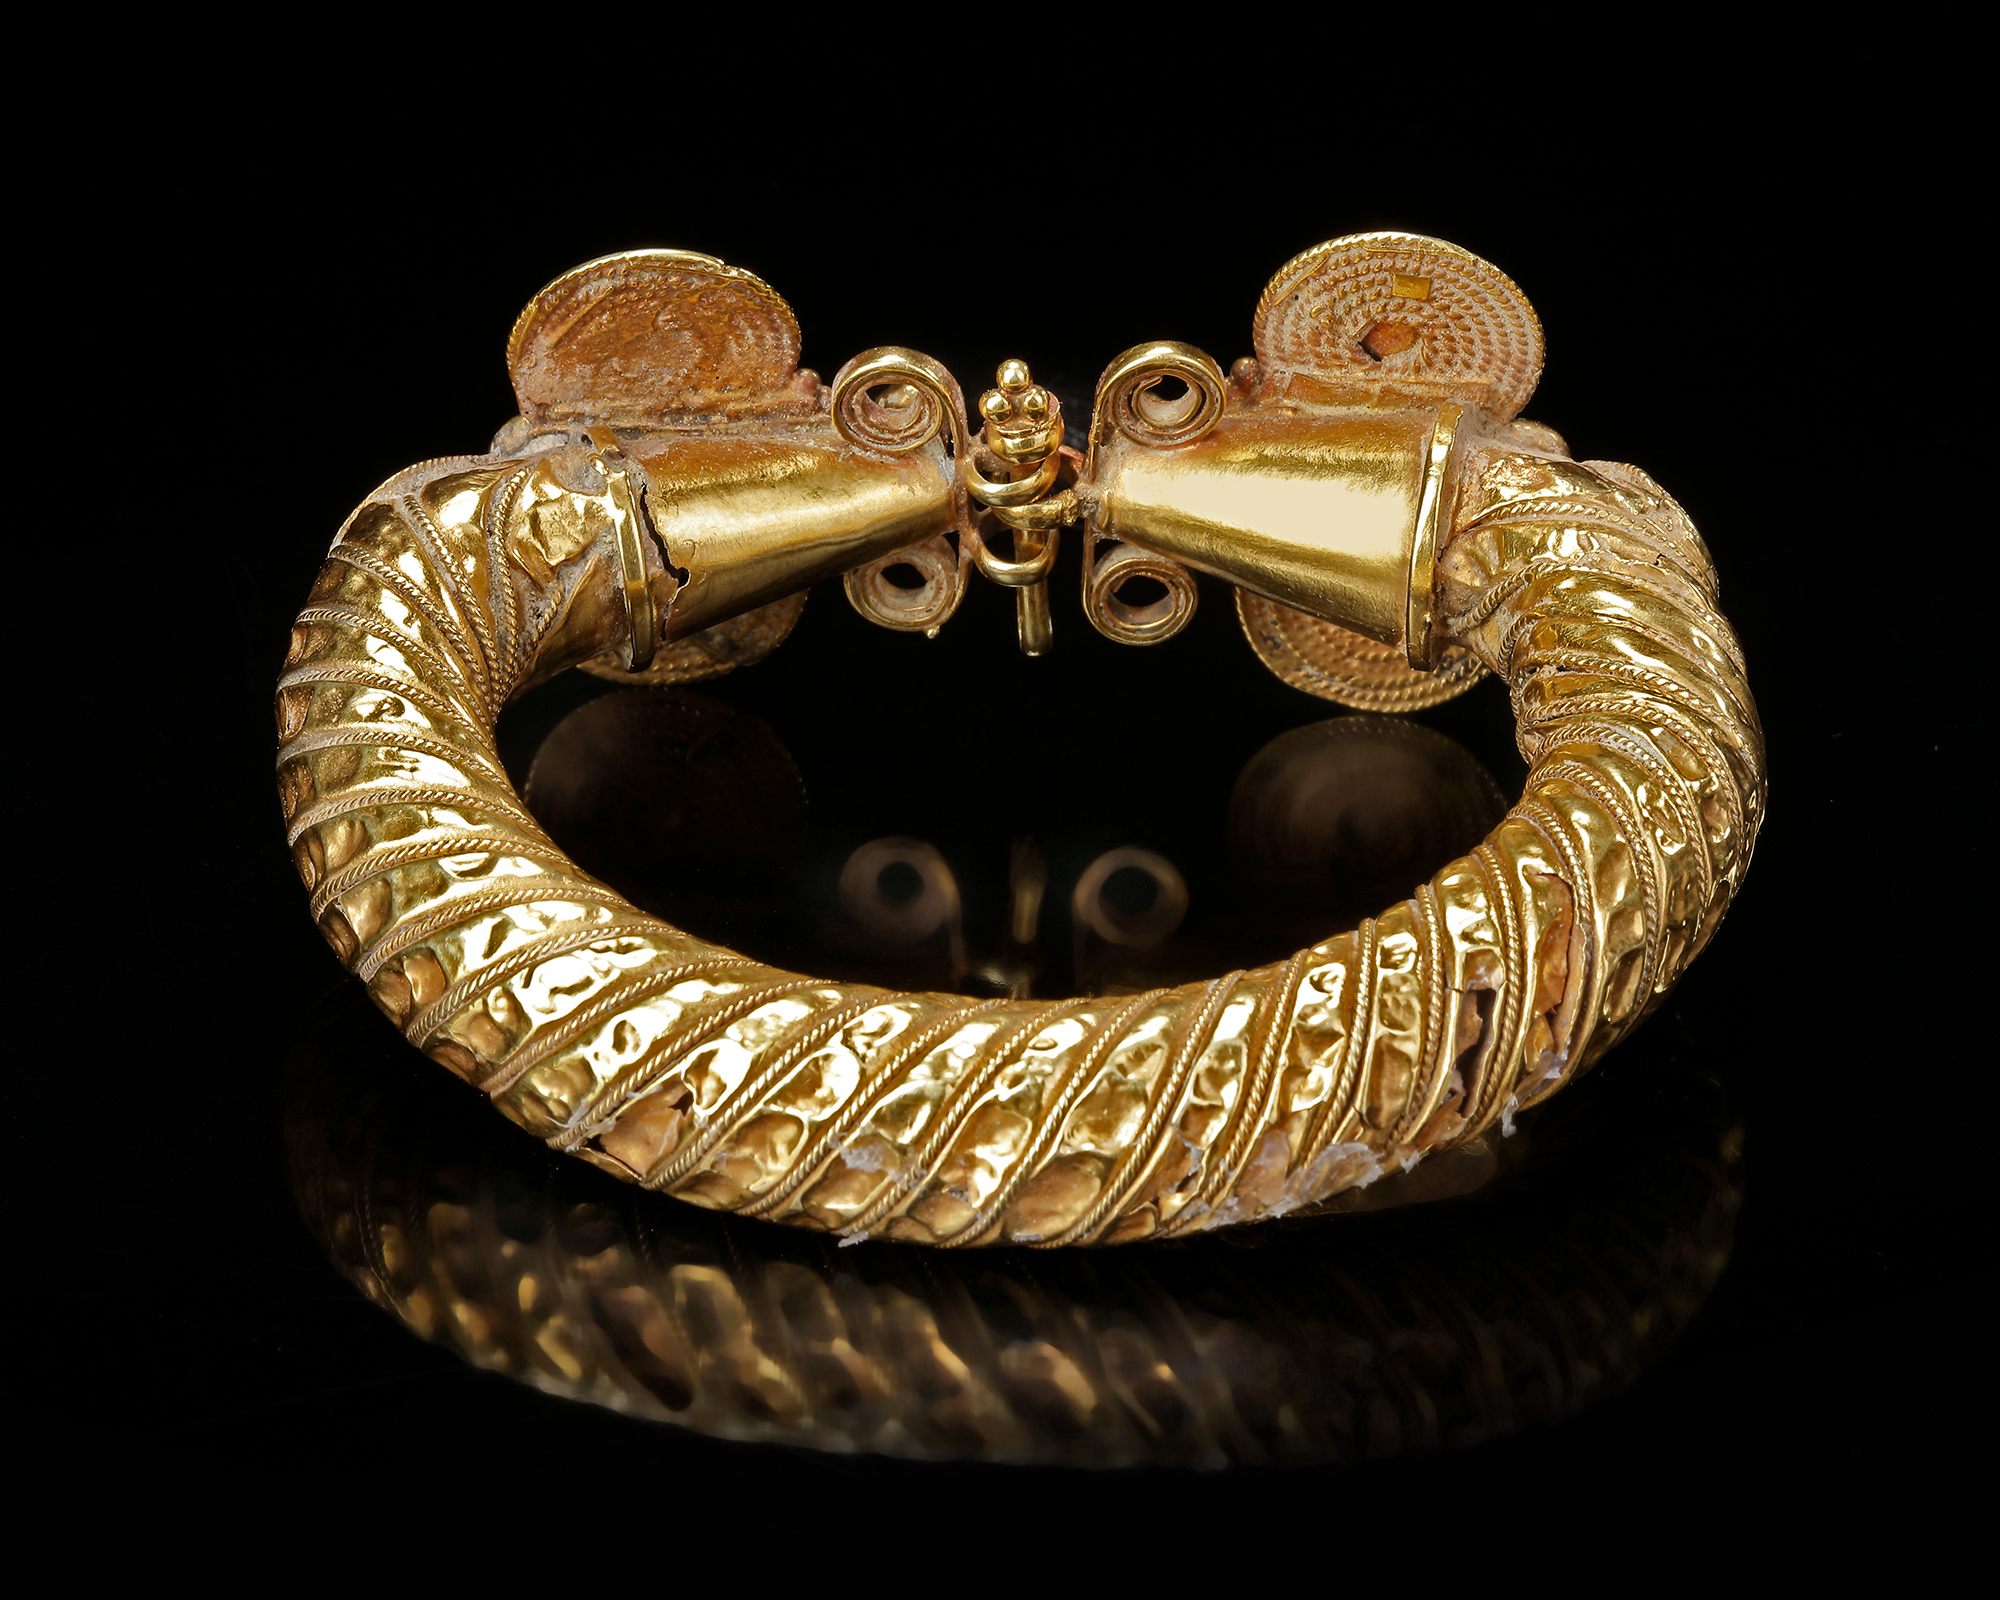 Persian Brass Bracelet with Coin Charm and Pearl